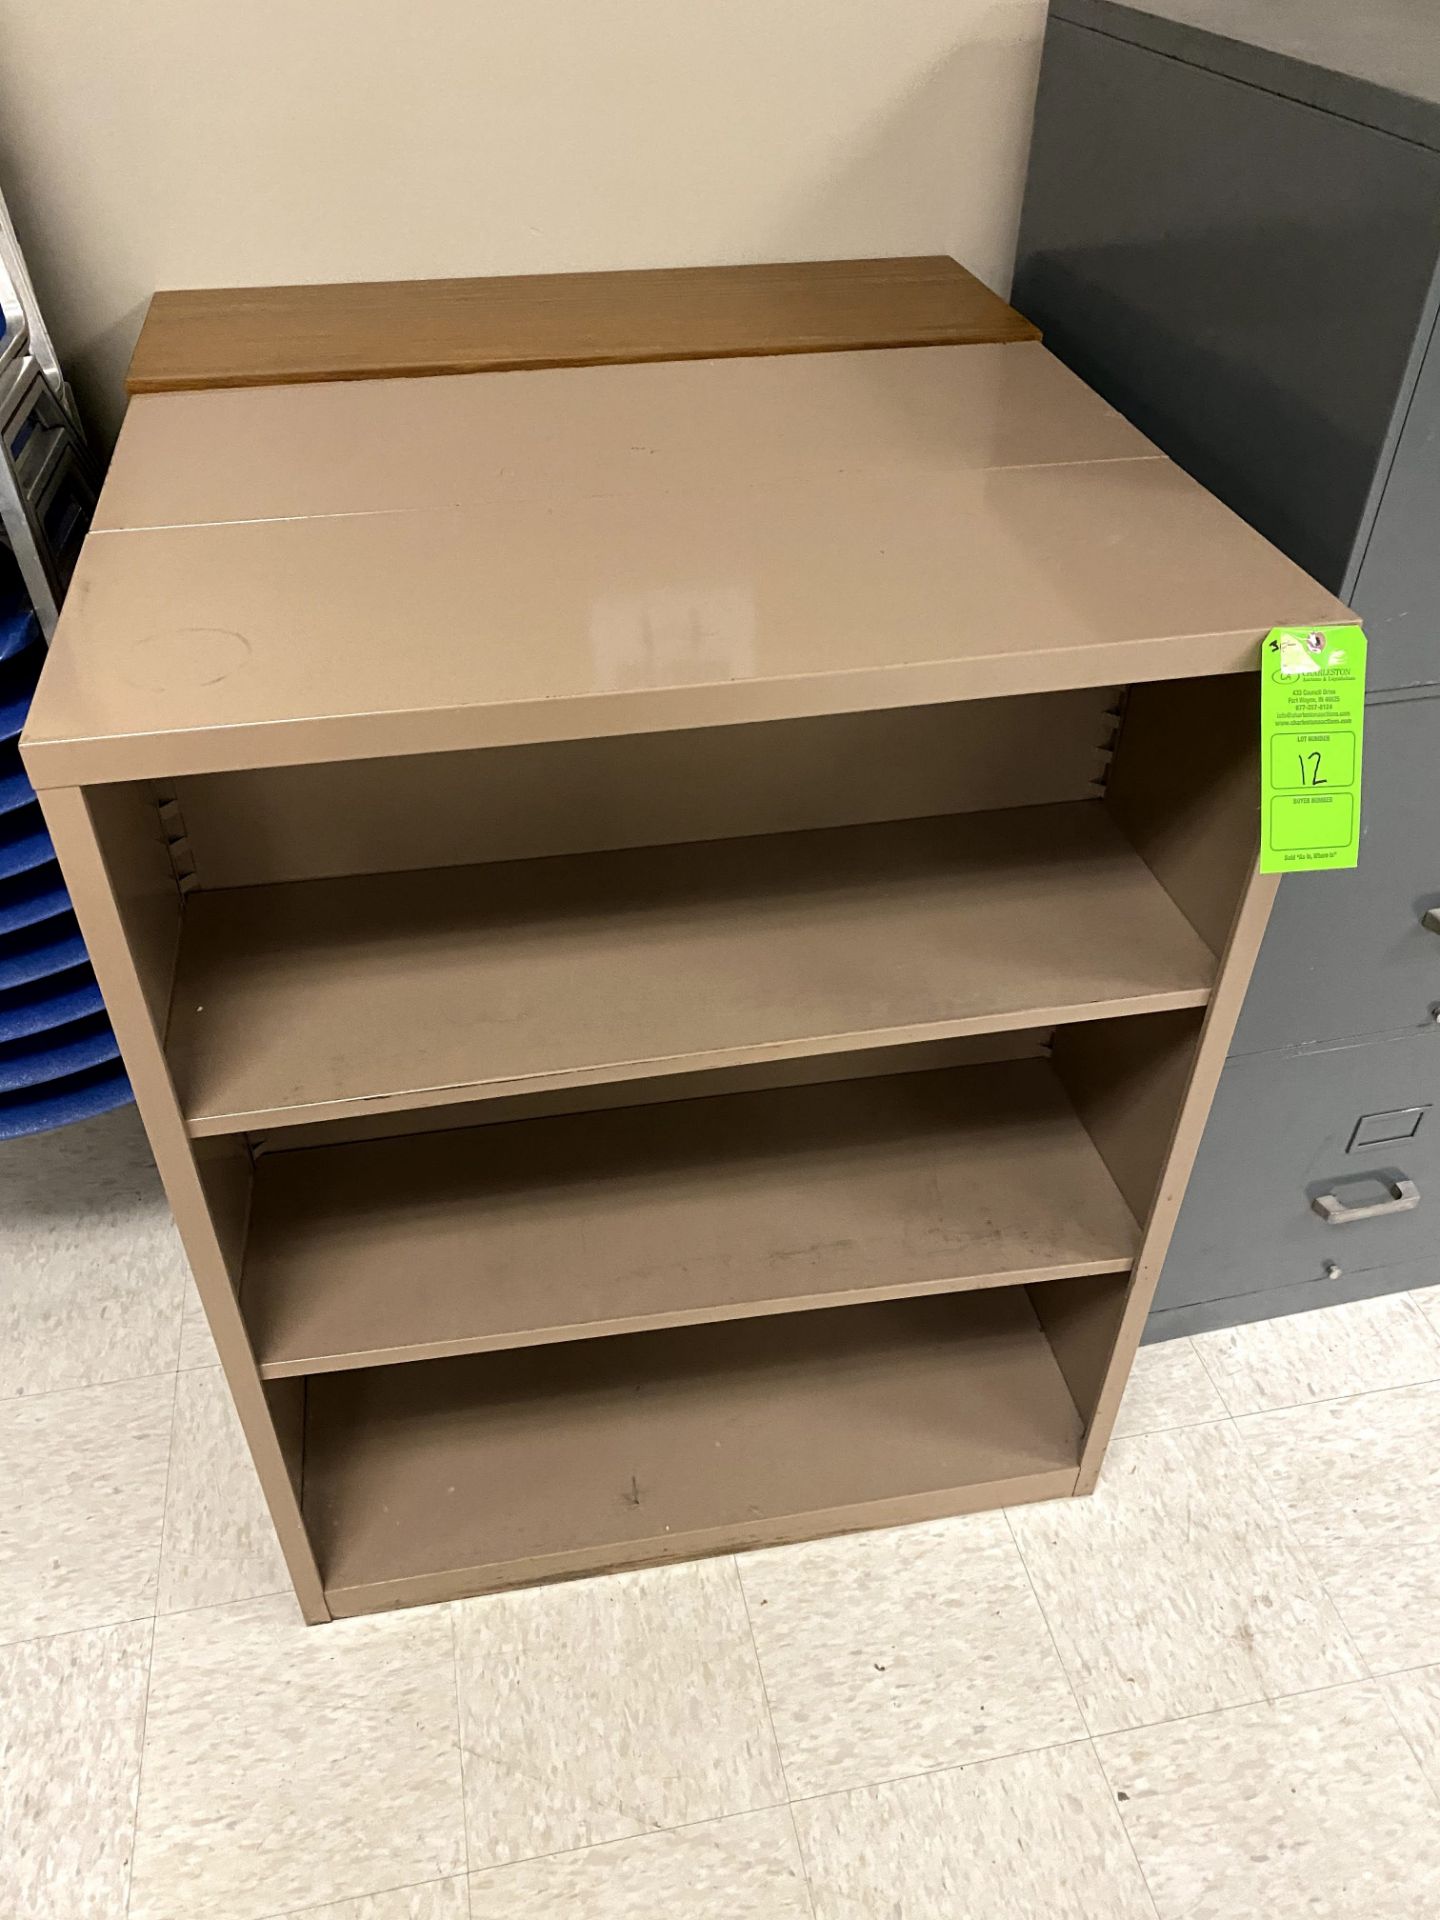 (3) STEELCASE BOOK SHELVE(S) -- (7625 OMNITECH PLACE VICTOR NEW YORK)